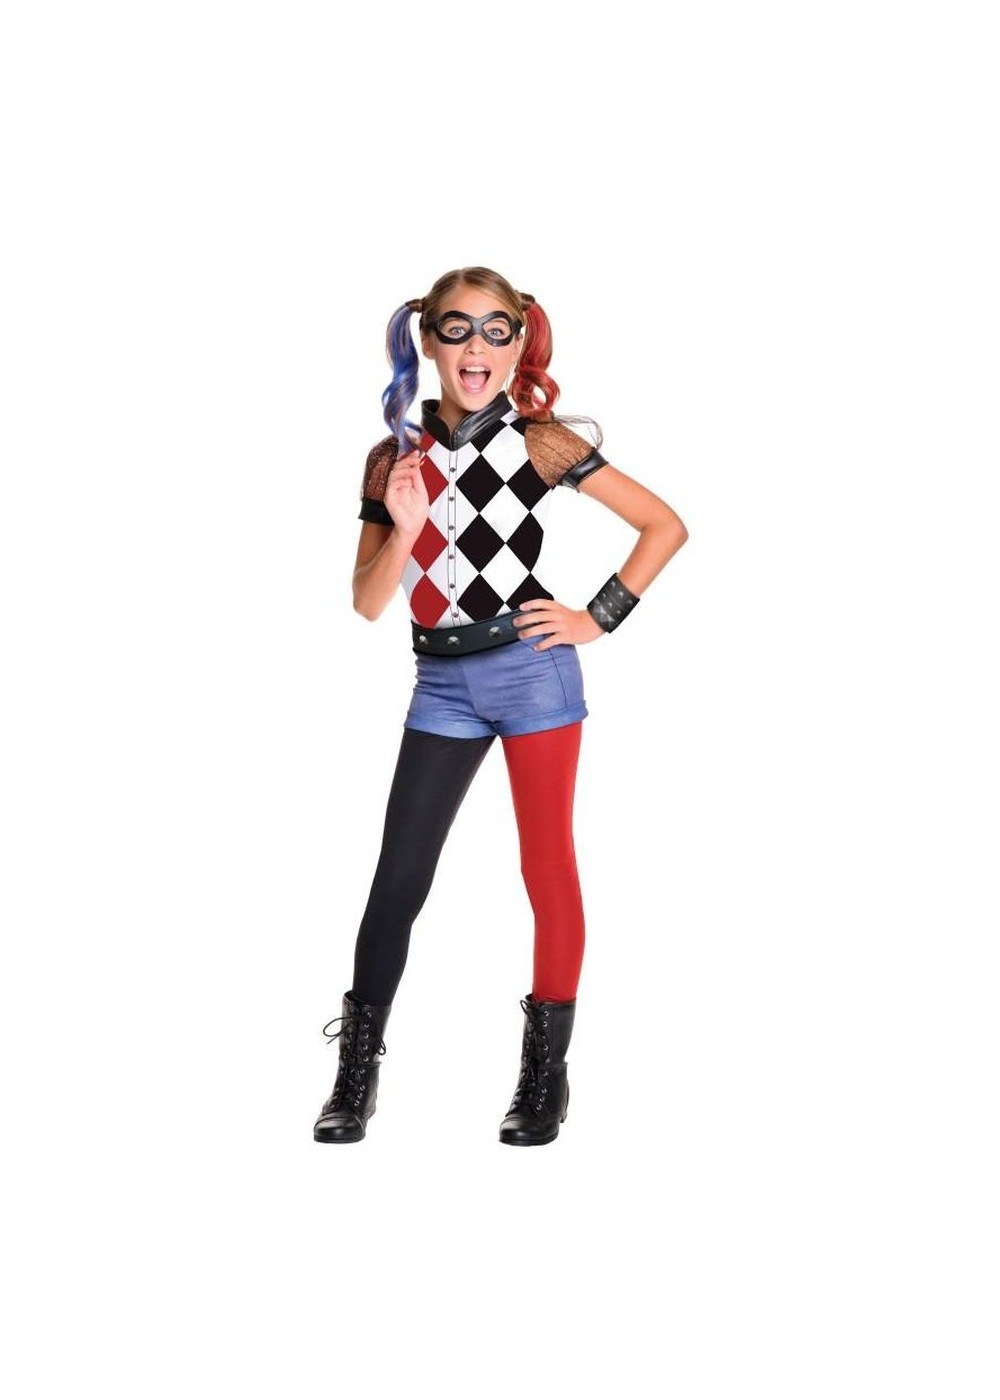 Suicide Squad Harley Quinn Girls Costume